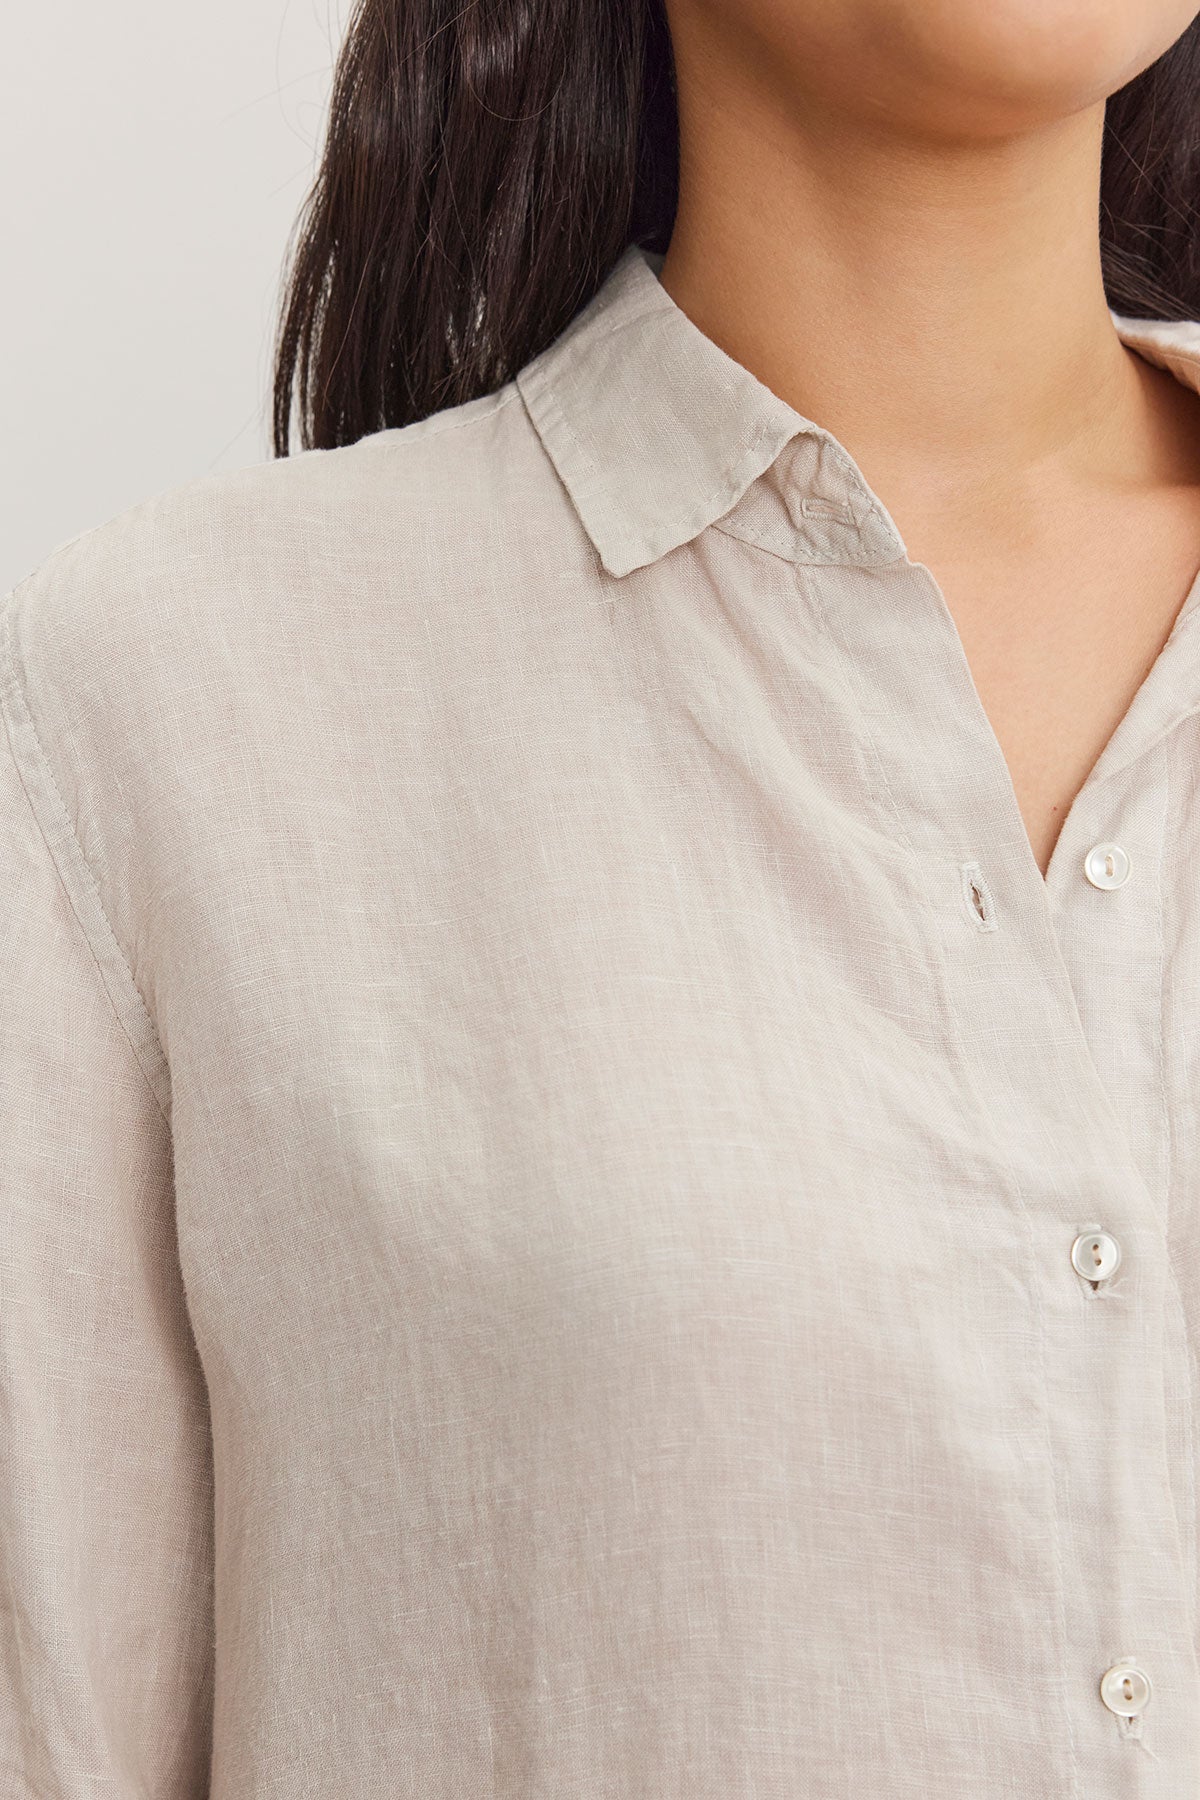 Close-up of a woman wearing a Velvet by Graham & Spencer WILLOW LINEN BUTTON-UP SHIRT with visible buttons and collar details.-36998739165377